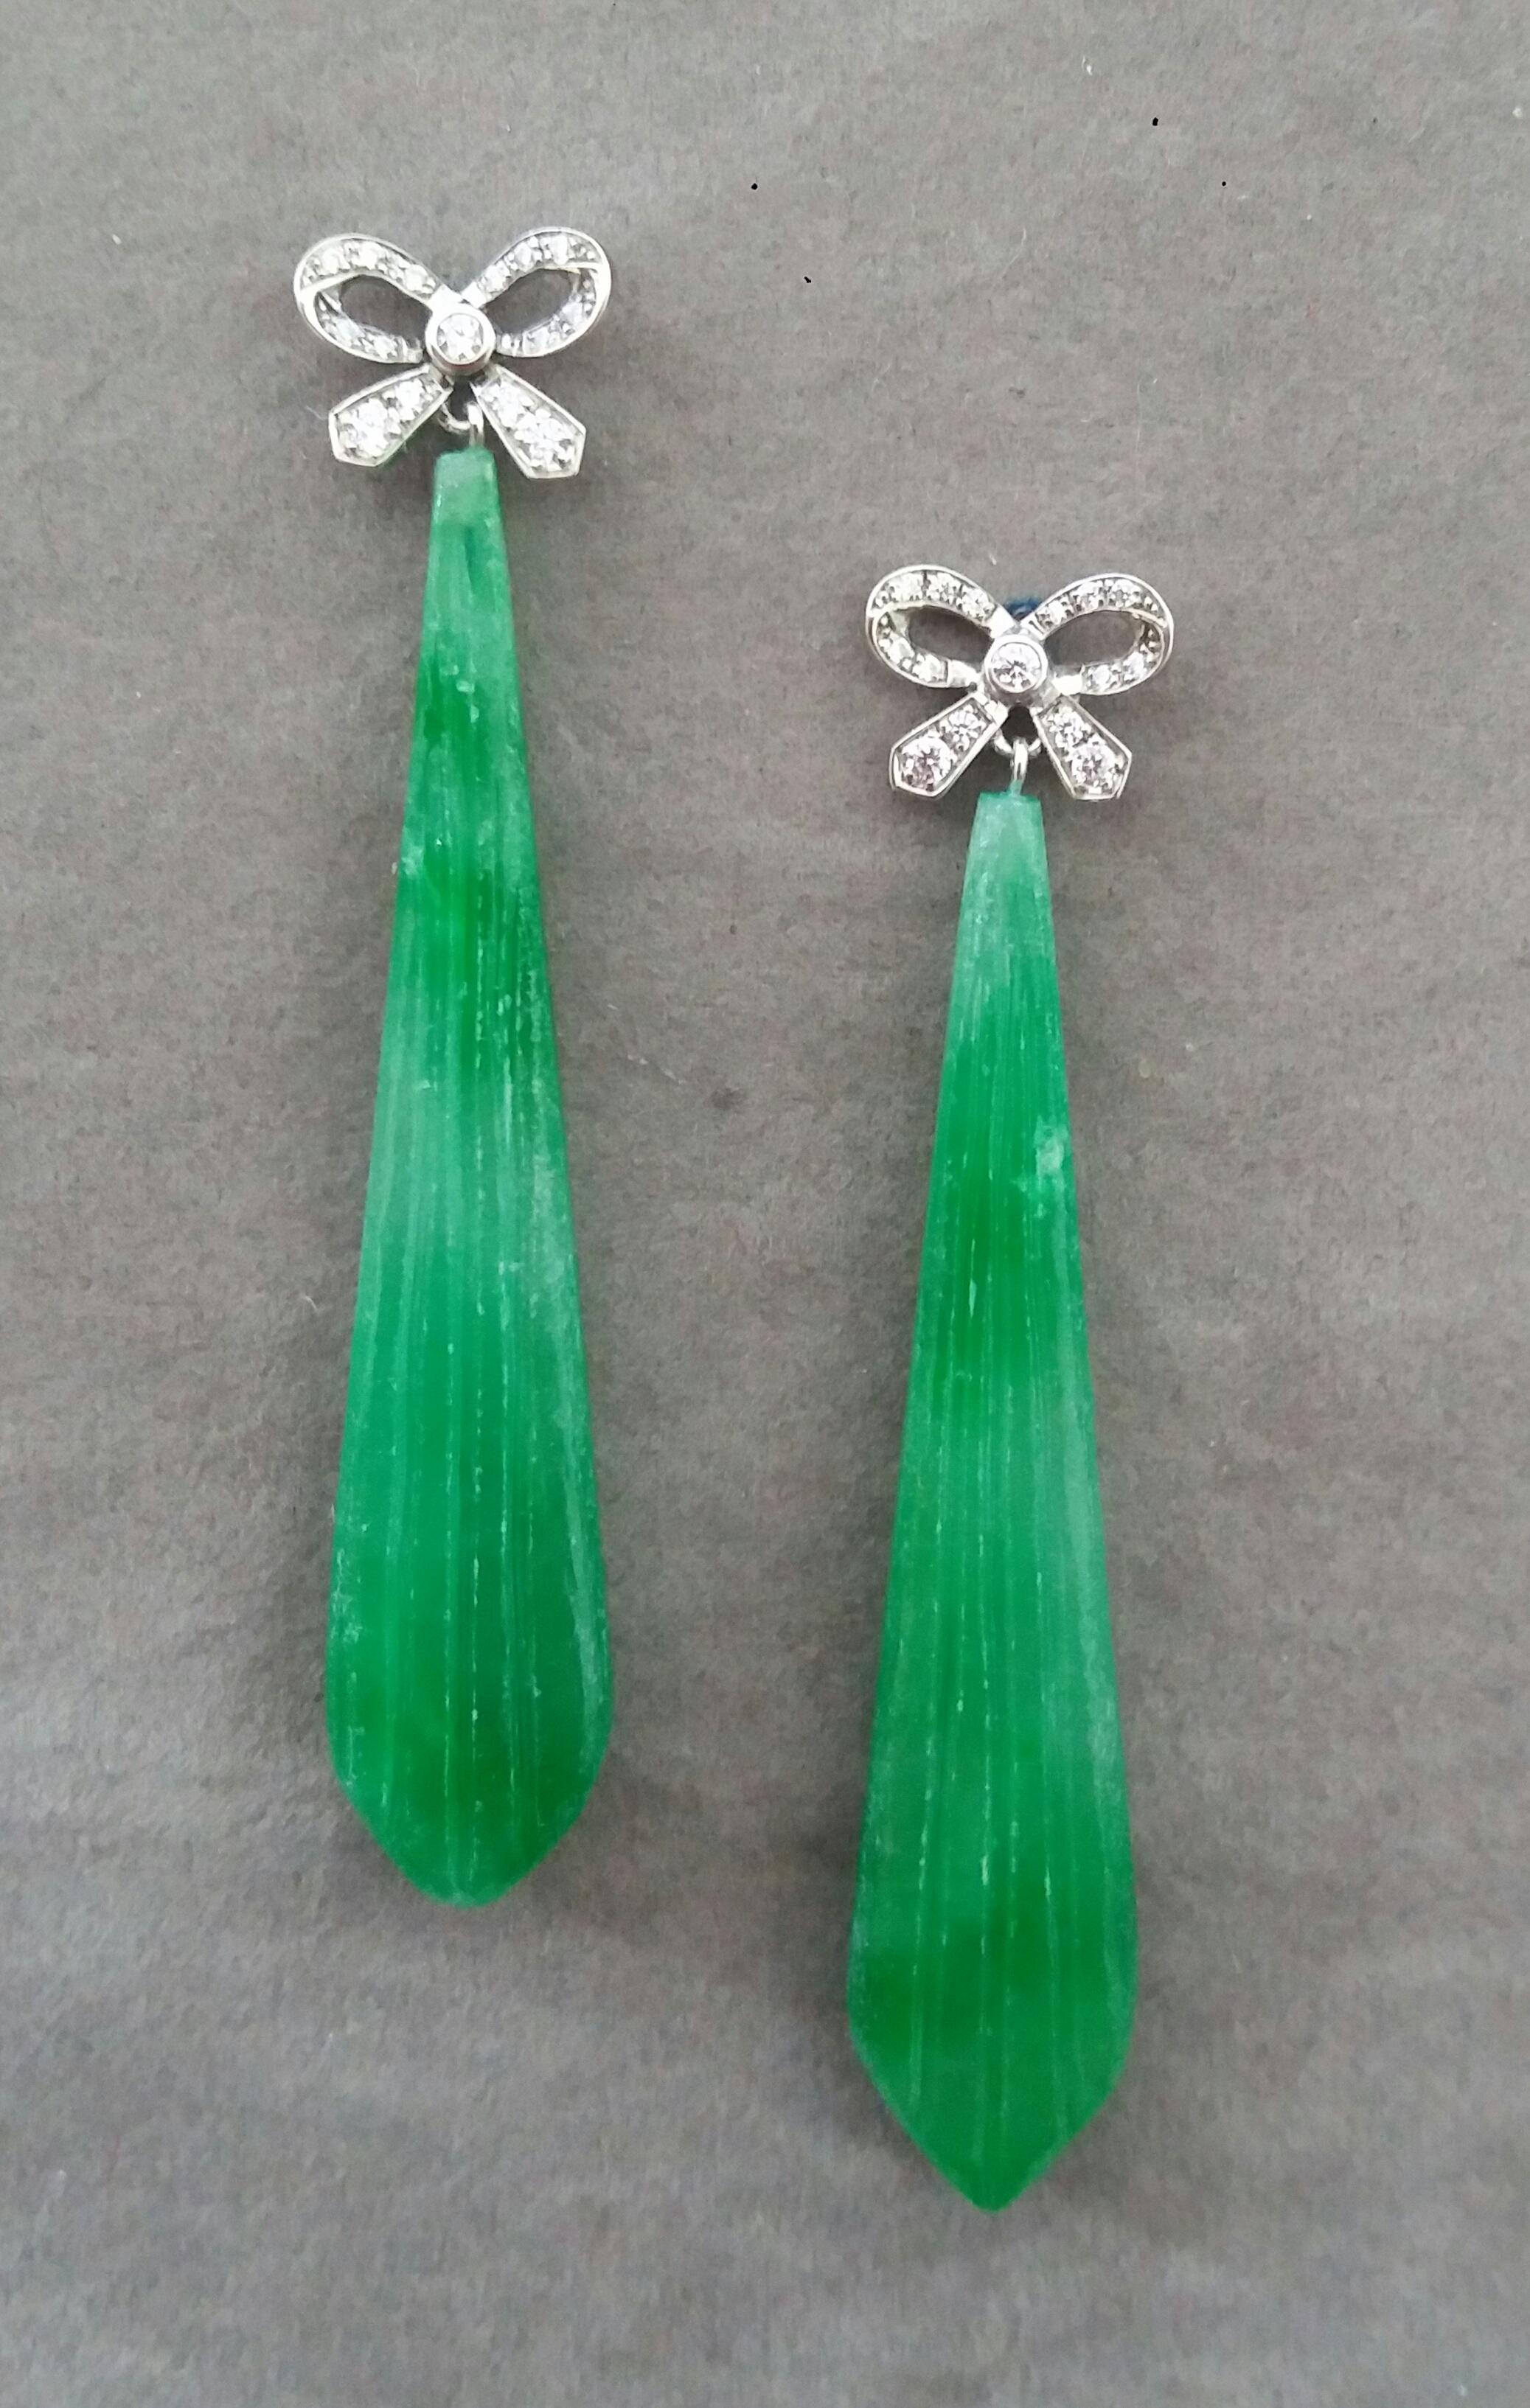 In these classic Art Deco Style earrings the tops are 2 White Gold and Diamonds  Bows, 28 round full cut diamonds and 1 pair ,in the lower parts we have 2 elongated Engraved Jade Drops measuring 13 x 62 mm. 

In 1978 our workshop started in Italy to